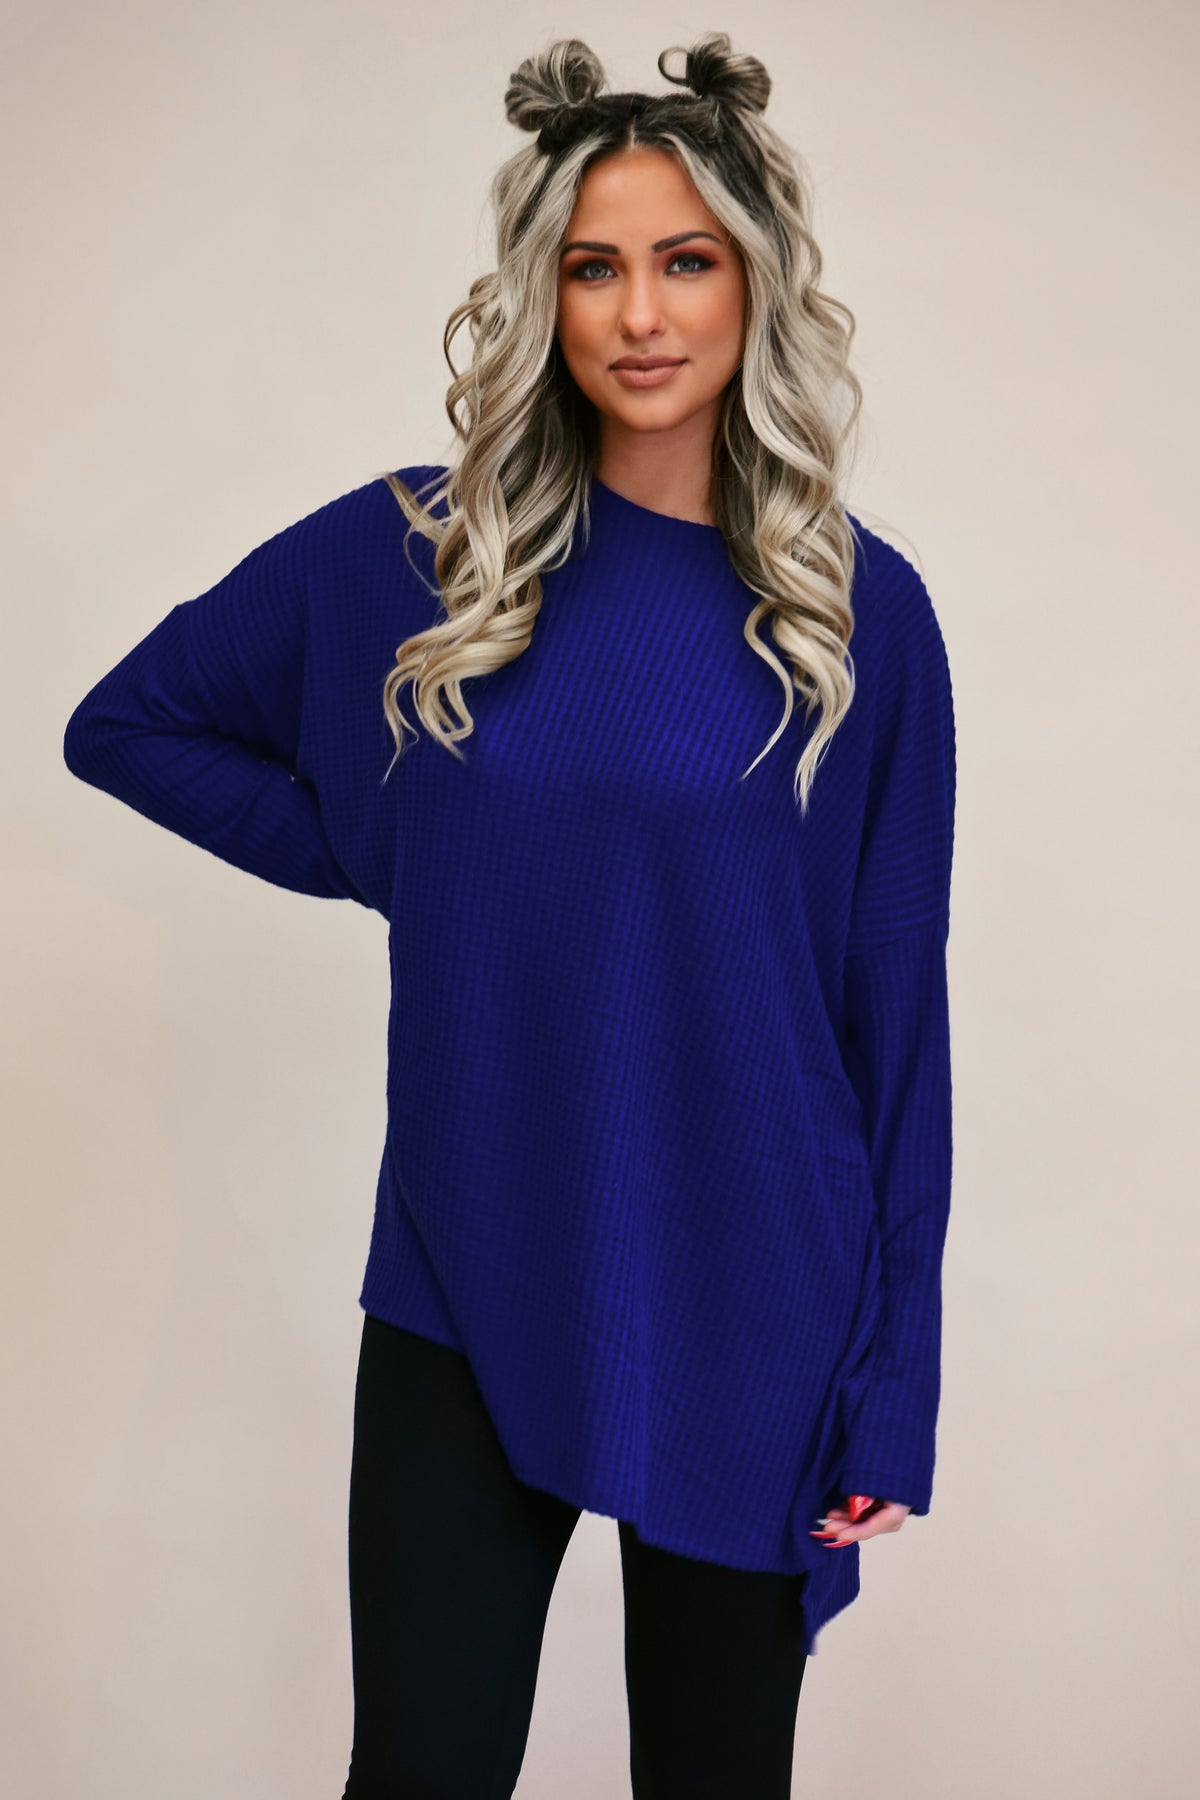 Here For Good Top: Blue